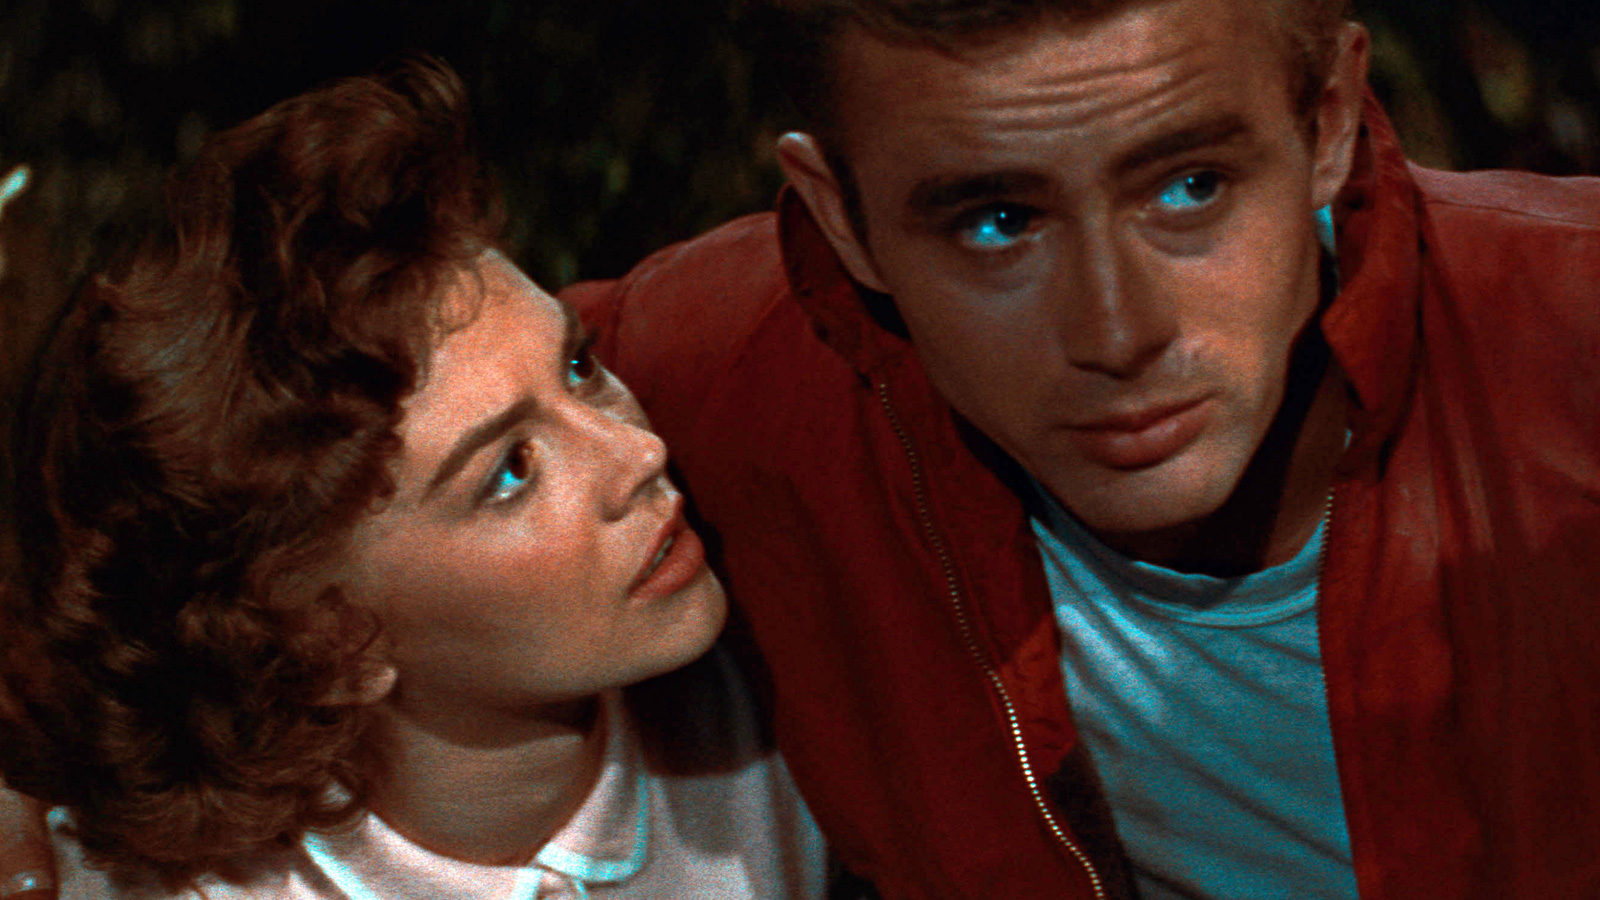 Only a Film Buff Can Name 14 ️ Top Movies from the 1950s Quiz Rebel Without A Cause (1955)